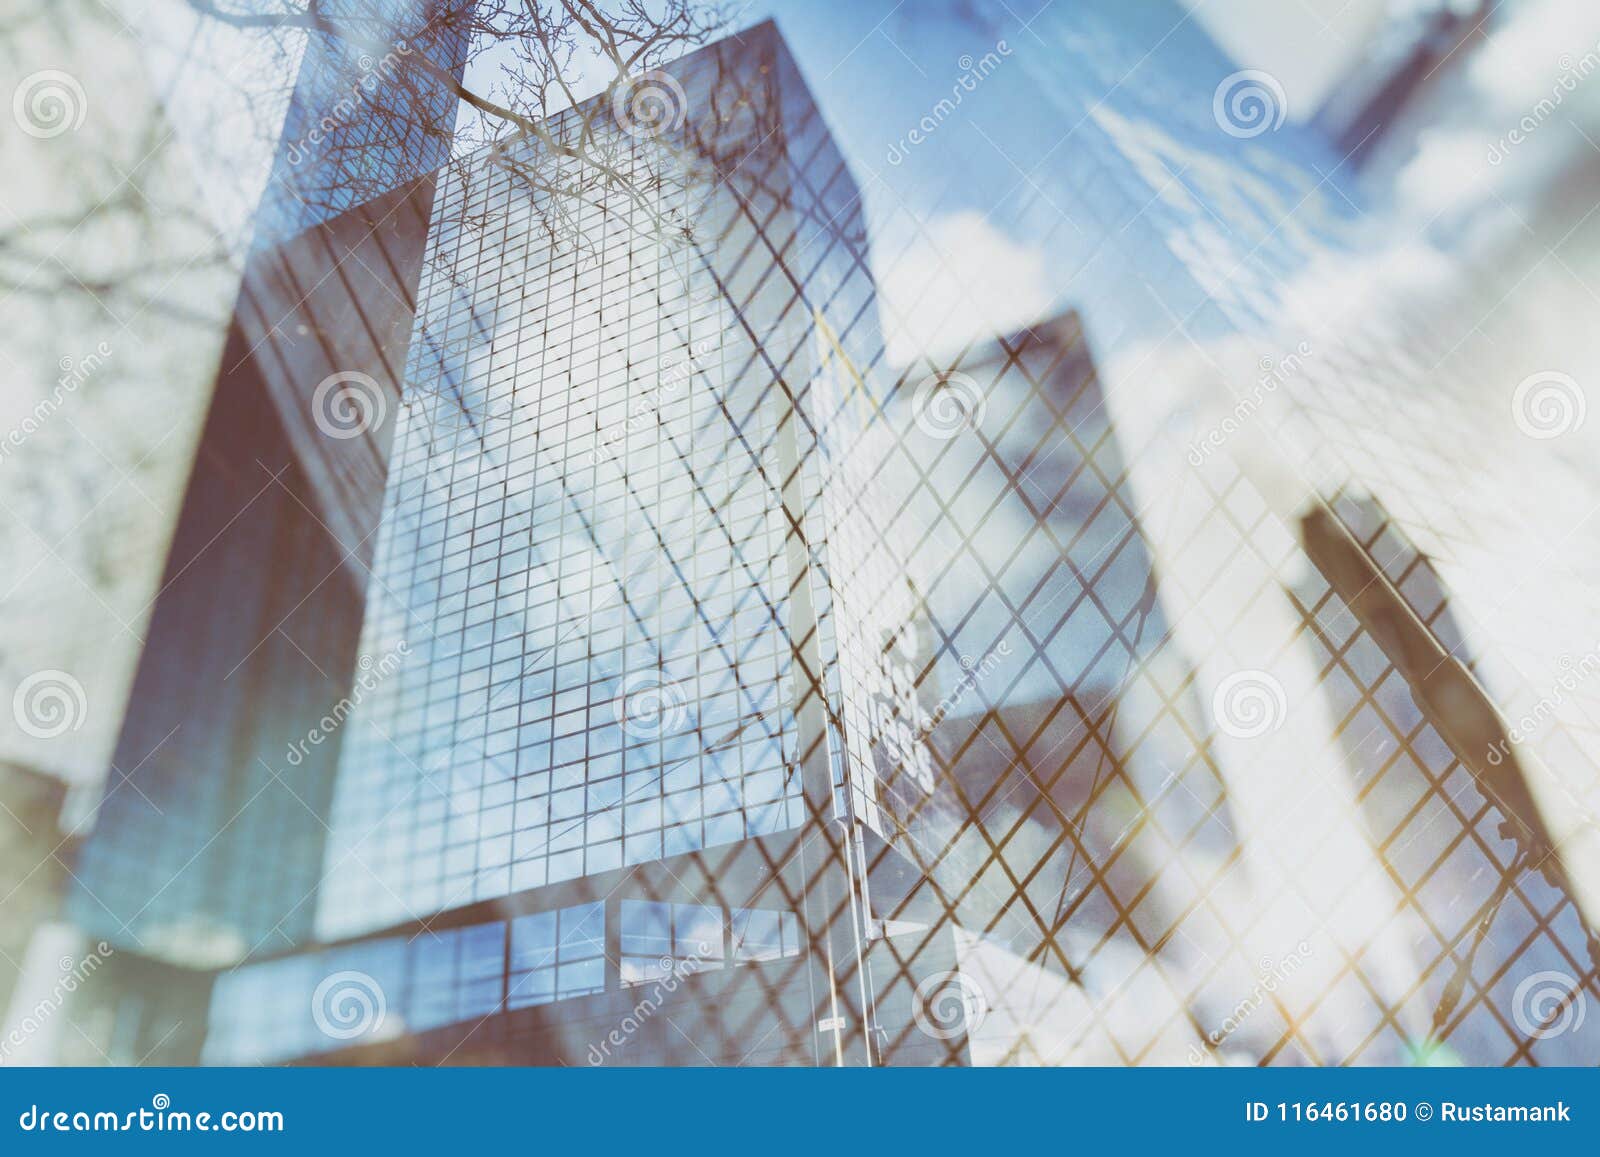 urban abstract background of glass skyscrapers with reflected sky in the windows